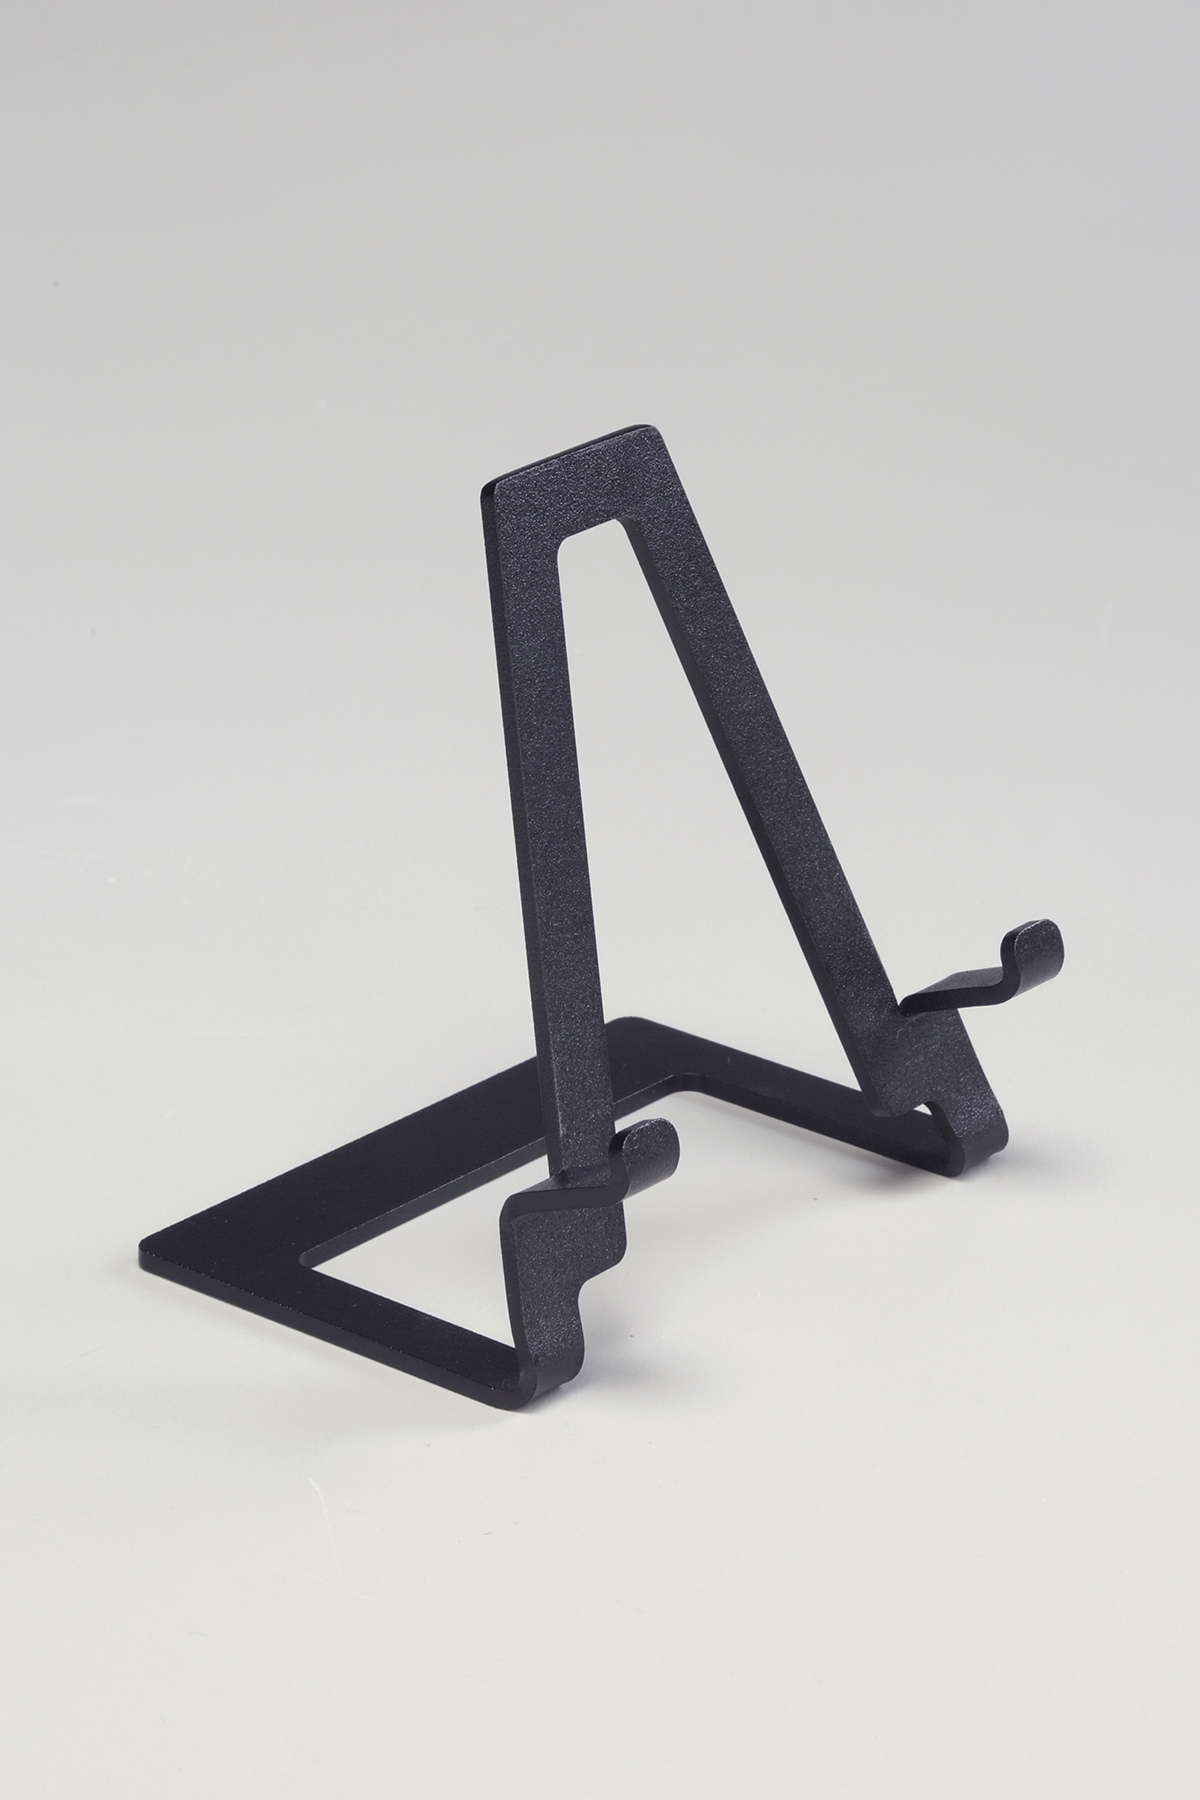 Emerson Display Easel for Ceramic Tiles